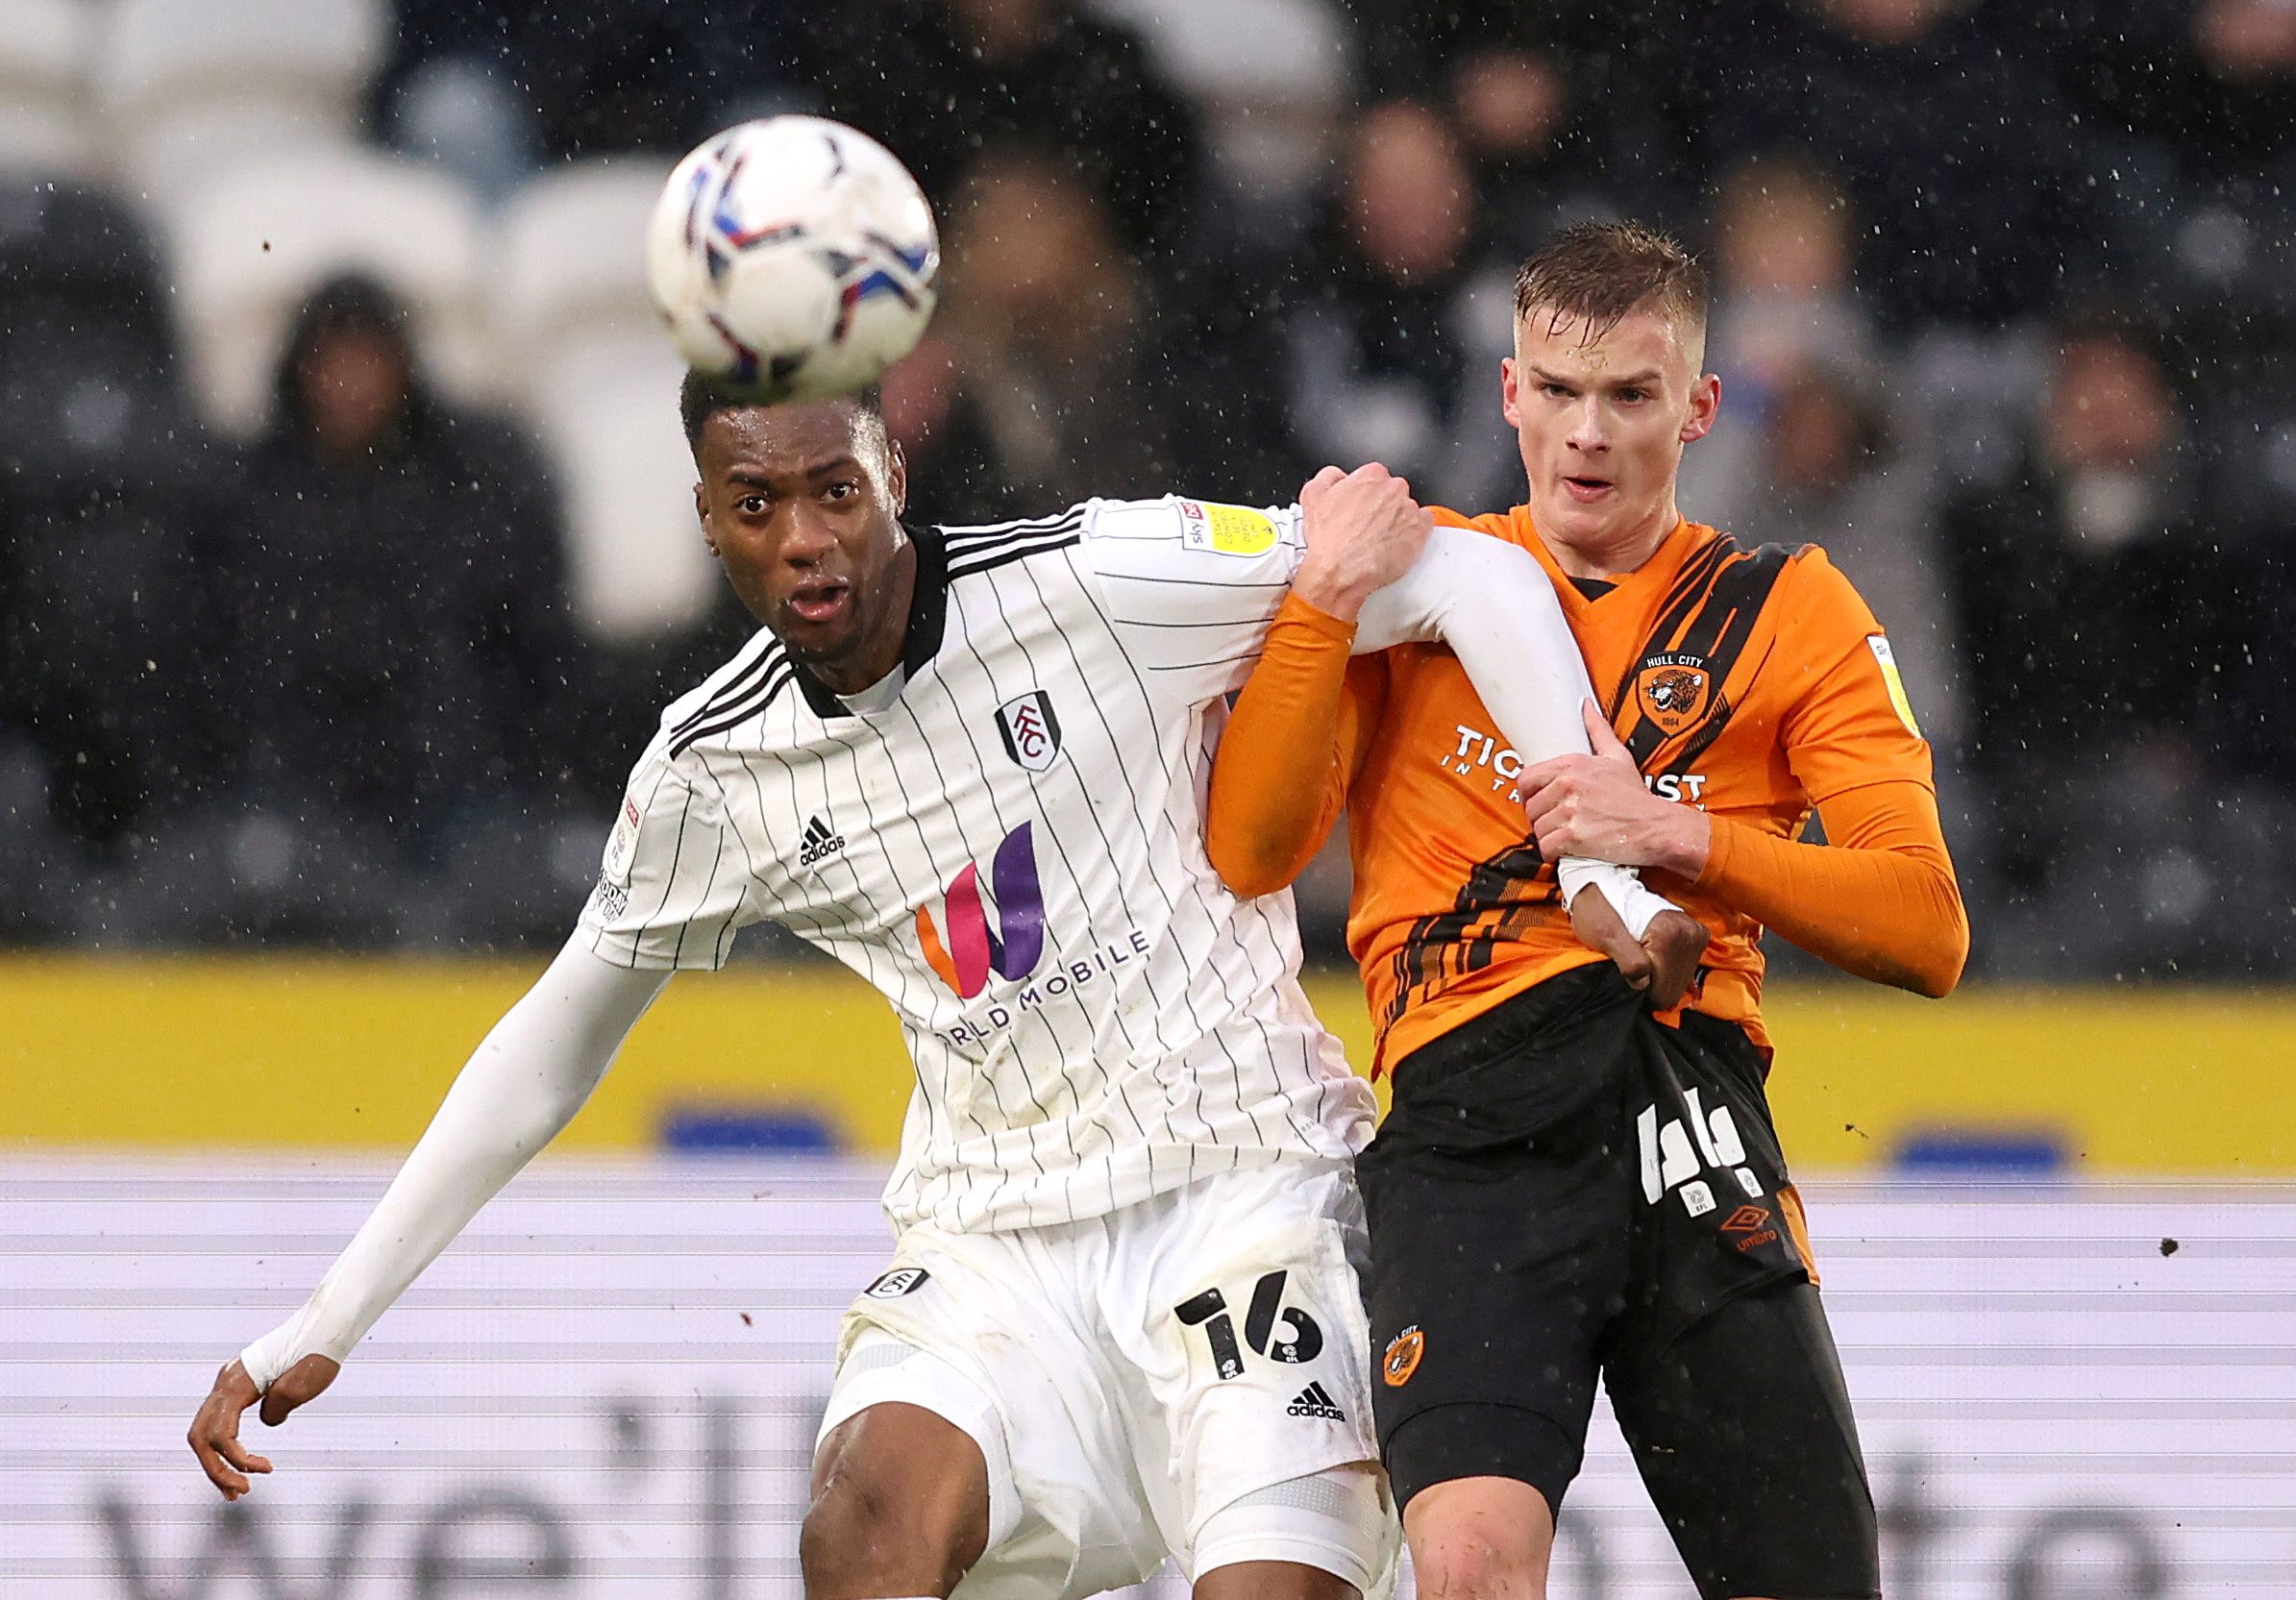 Soccer Football - Championship - Hull City v Fulham - KCOM Stadium, Hull, Britain - February 12, 2022  Fulham's Tosin Adarabioyo in action with Hull City's Marcus Forss  Action Images/John Clifton  EDITORIAL USE ONLY. No use with unauthorized audio, video, data, fixture lists, club/league logos or "live" services. Online in-match use limited to 75 images, no video emulation. No use in betting, games or single club/league/player publications.  Please contact your account representative for furthe